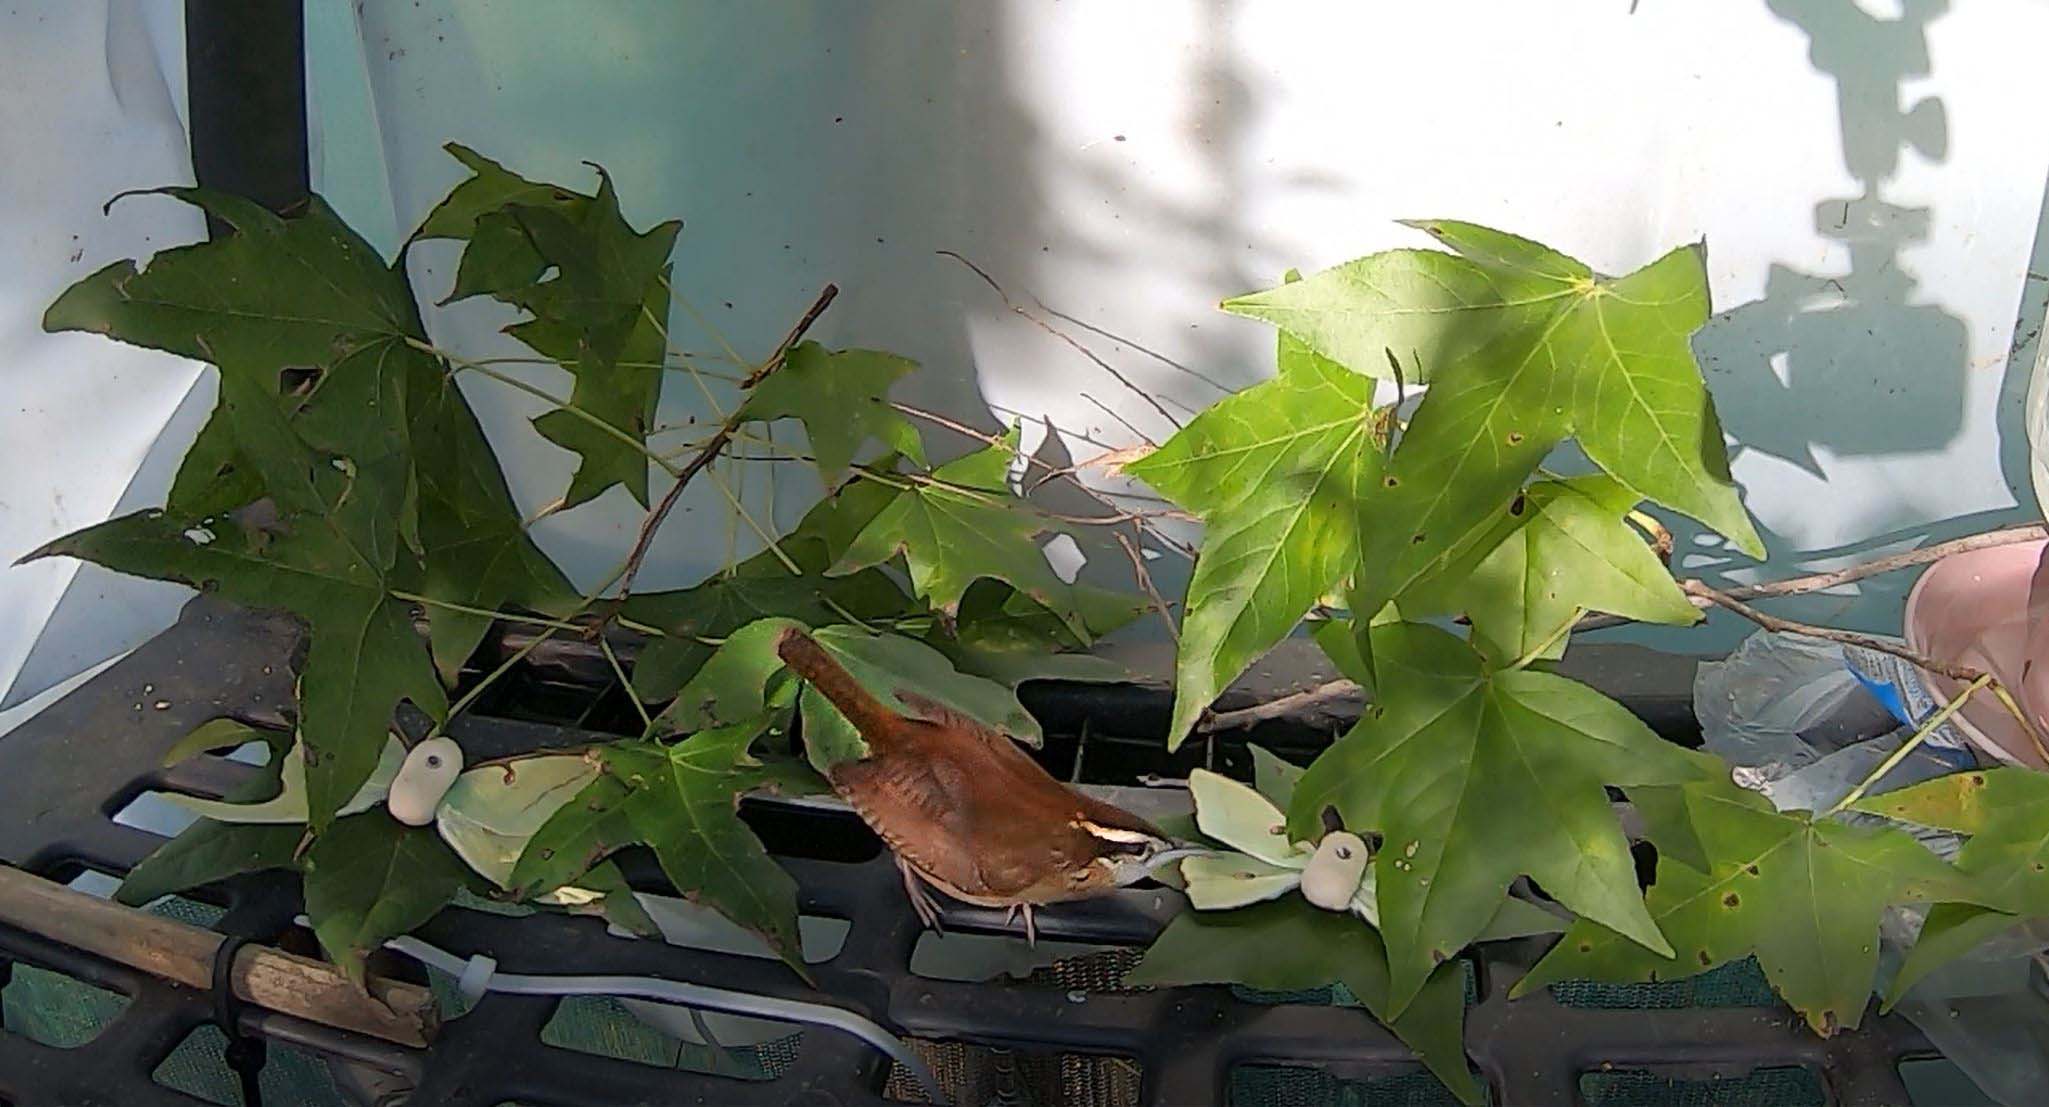 The image shows a Carolina Wren standing on some sort of black grate against a white wall. The wren itself is a rich brown, with a white stripe running over its eye and back down its head, and a gray chin. it's looking to the right of the image. On either side of it, bait moths are visible, but they're partially covered by what leaves. 